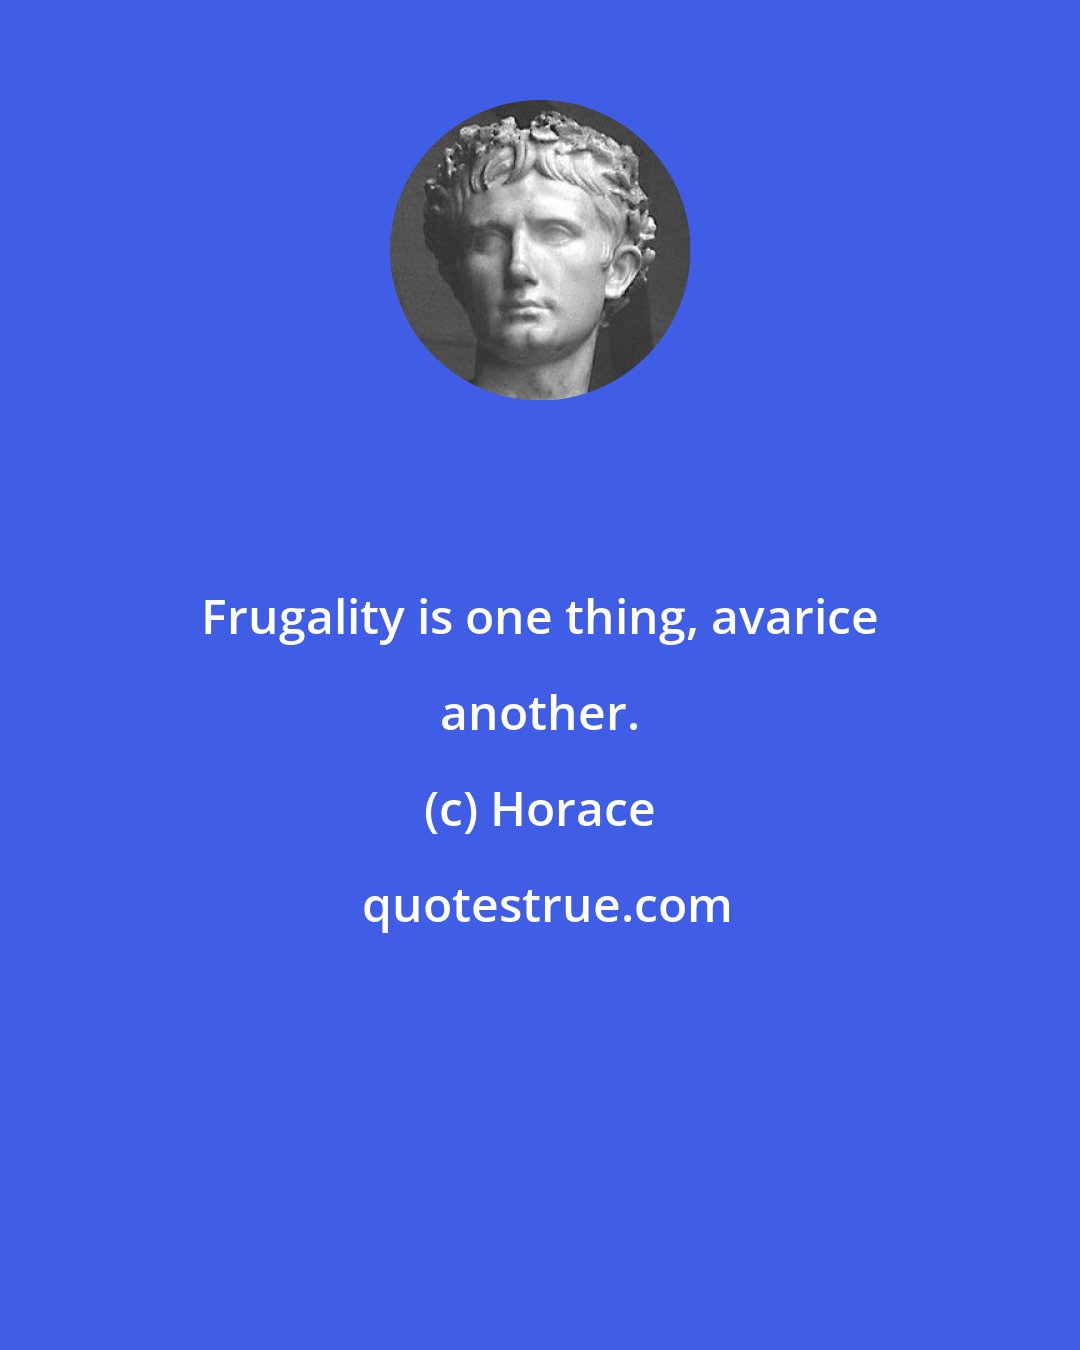 Horace: Frugality is one thing, avarice another.